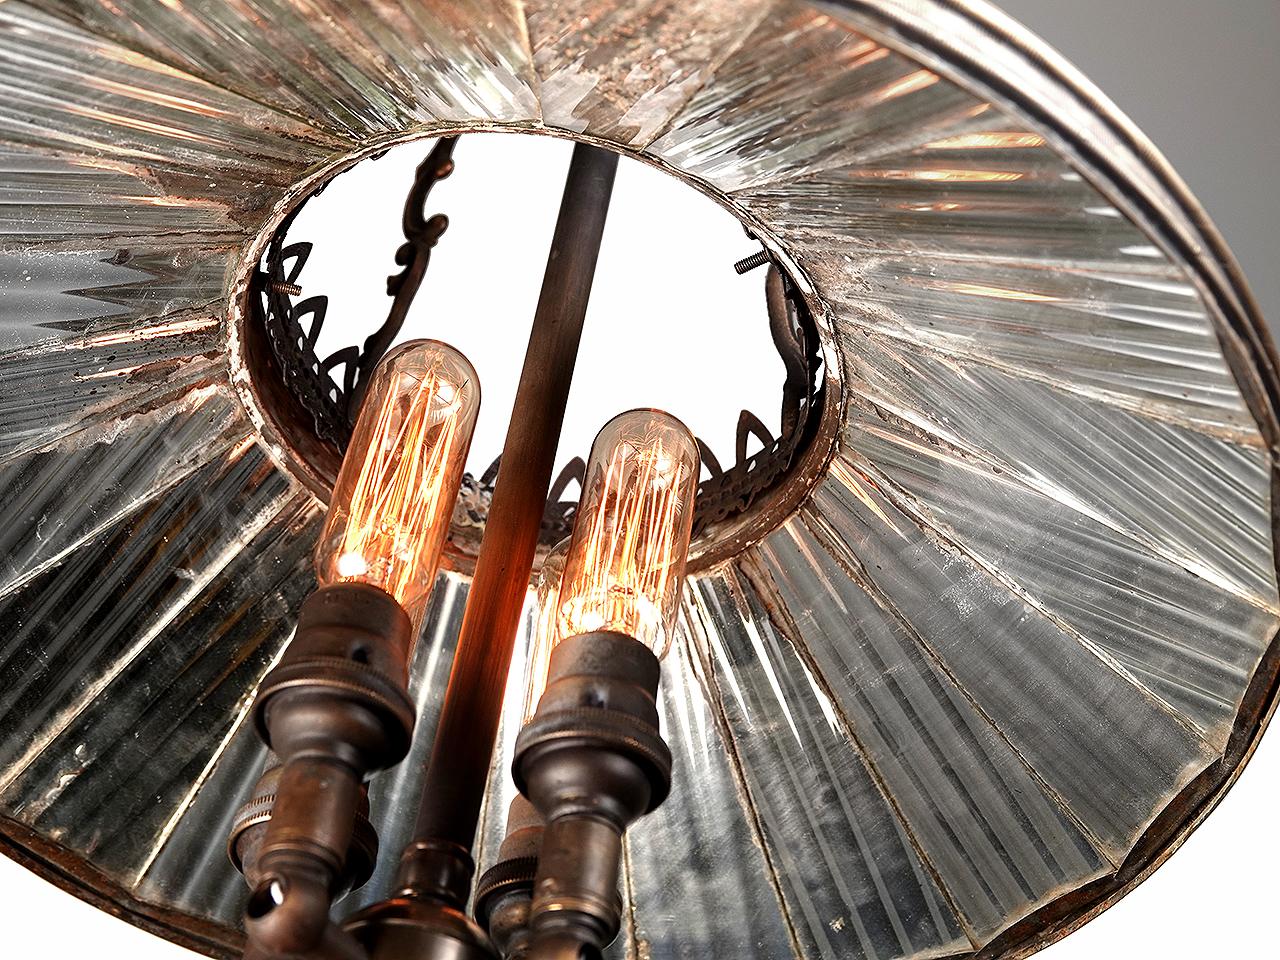 I'm always on the look out for these turn of the century mirrored lamps. They are the Holy Grail of industrial lighting. Collectors love them and they are very hard to find. This is a nice decorative example with a lot of detail.
Originally gas...